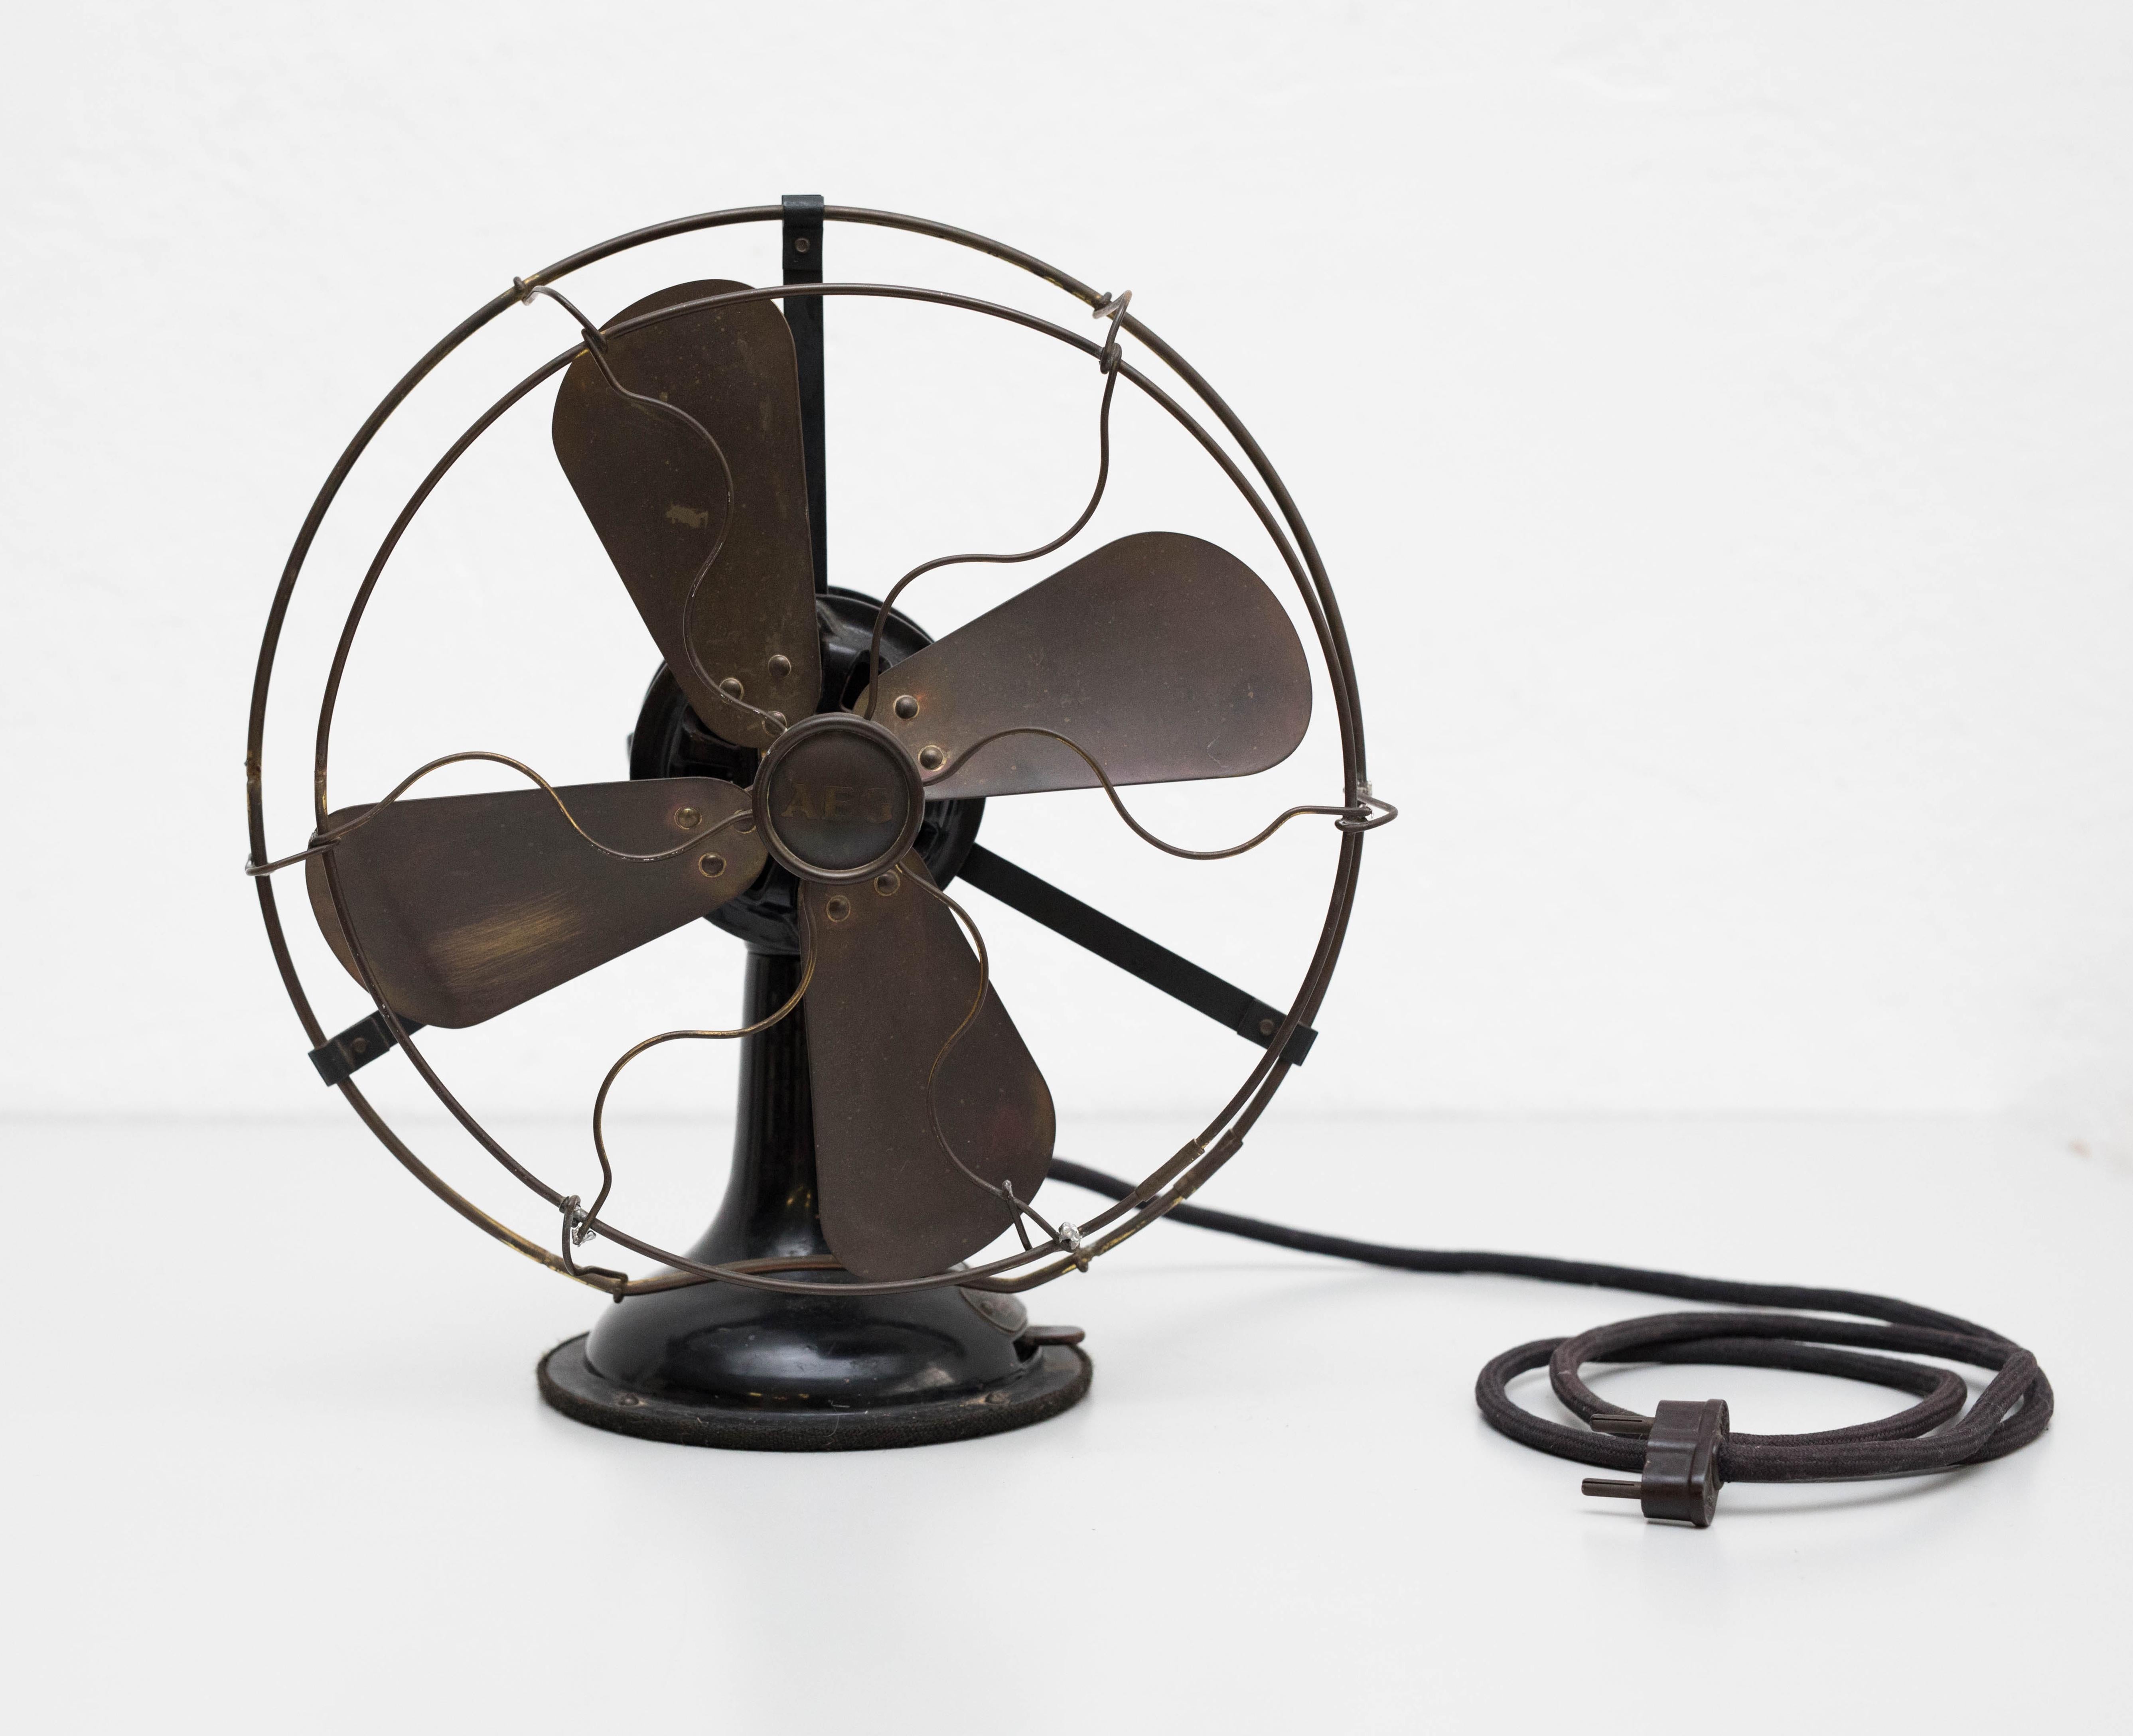 AEG fan.
Manufactured Germany, circa 1940.

In original condition, with minor wear consistent of age and use, preserving a beautiful patina.
The mechanical condition of the fan hasn't been tested.

Materials:
Metal

Dimensions: 
D 16 cm x